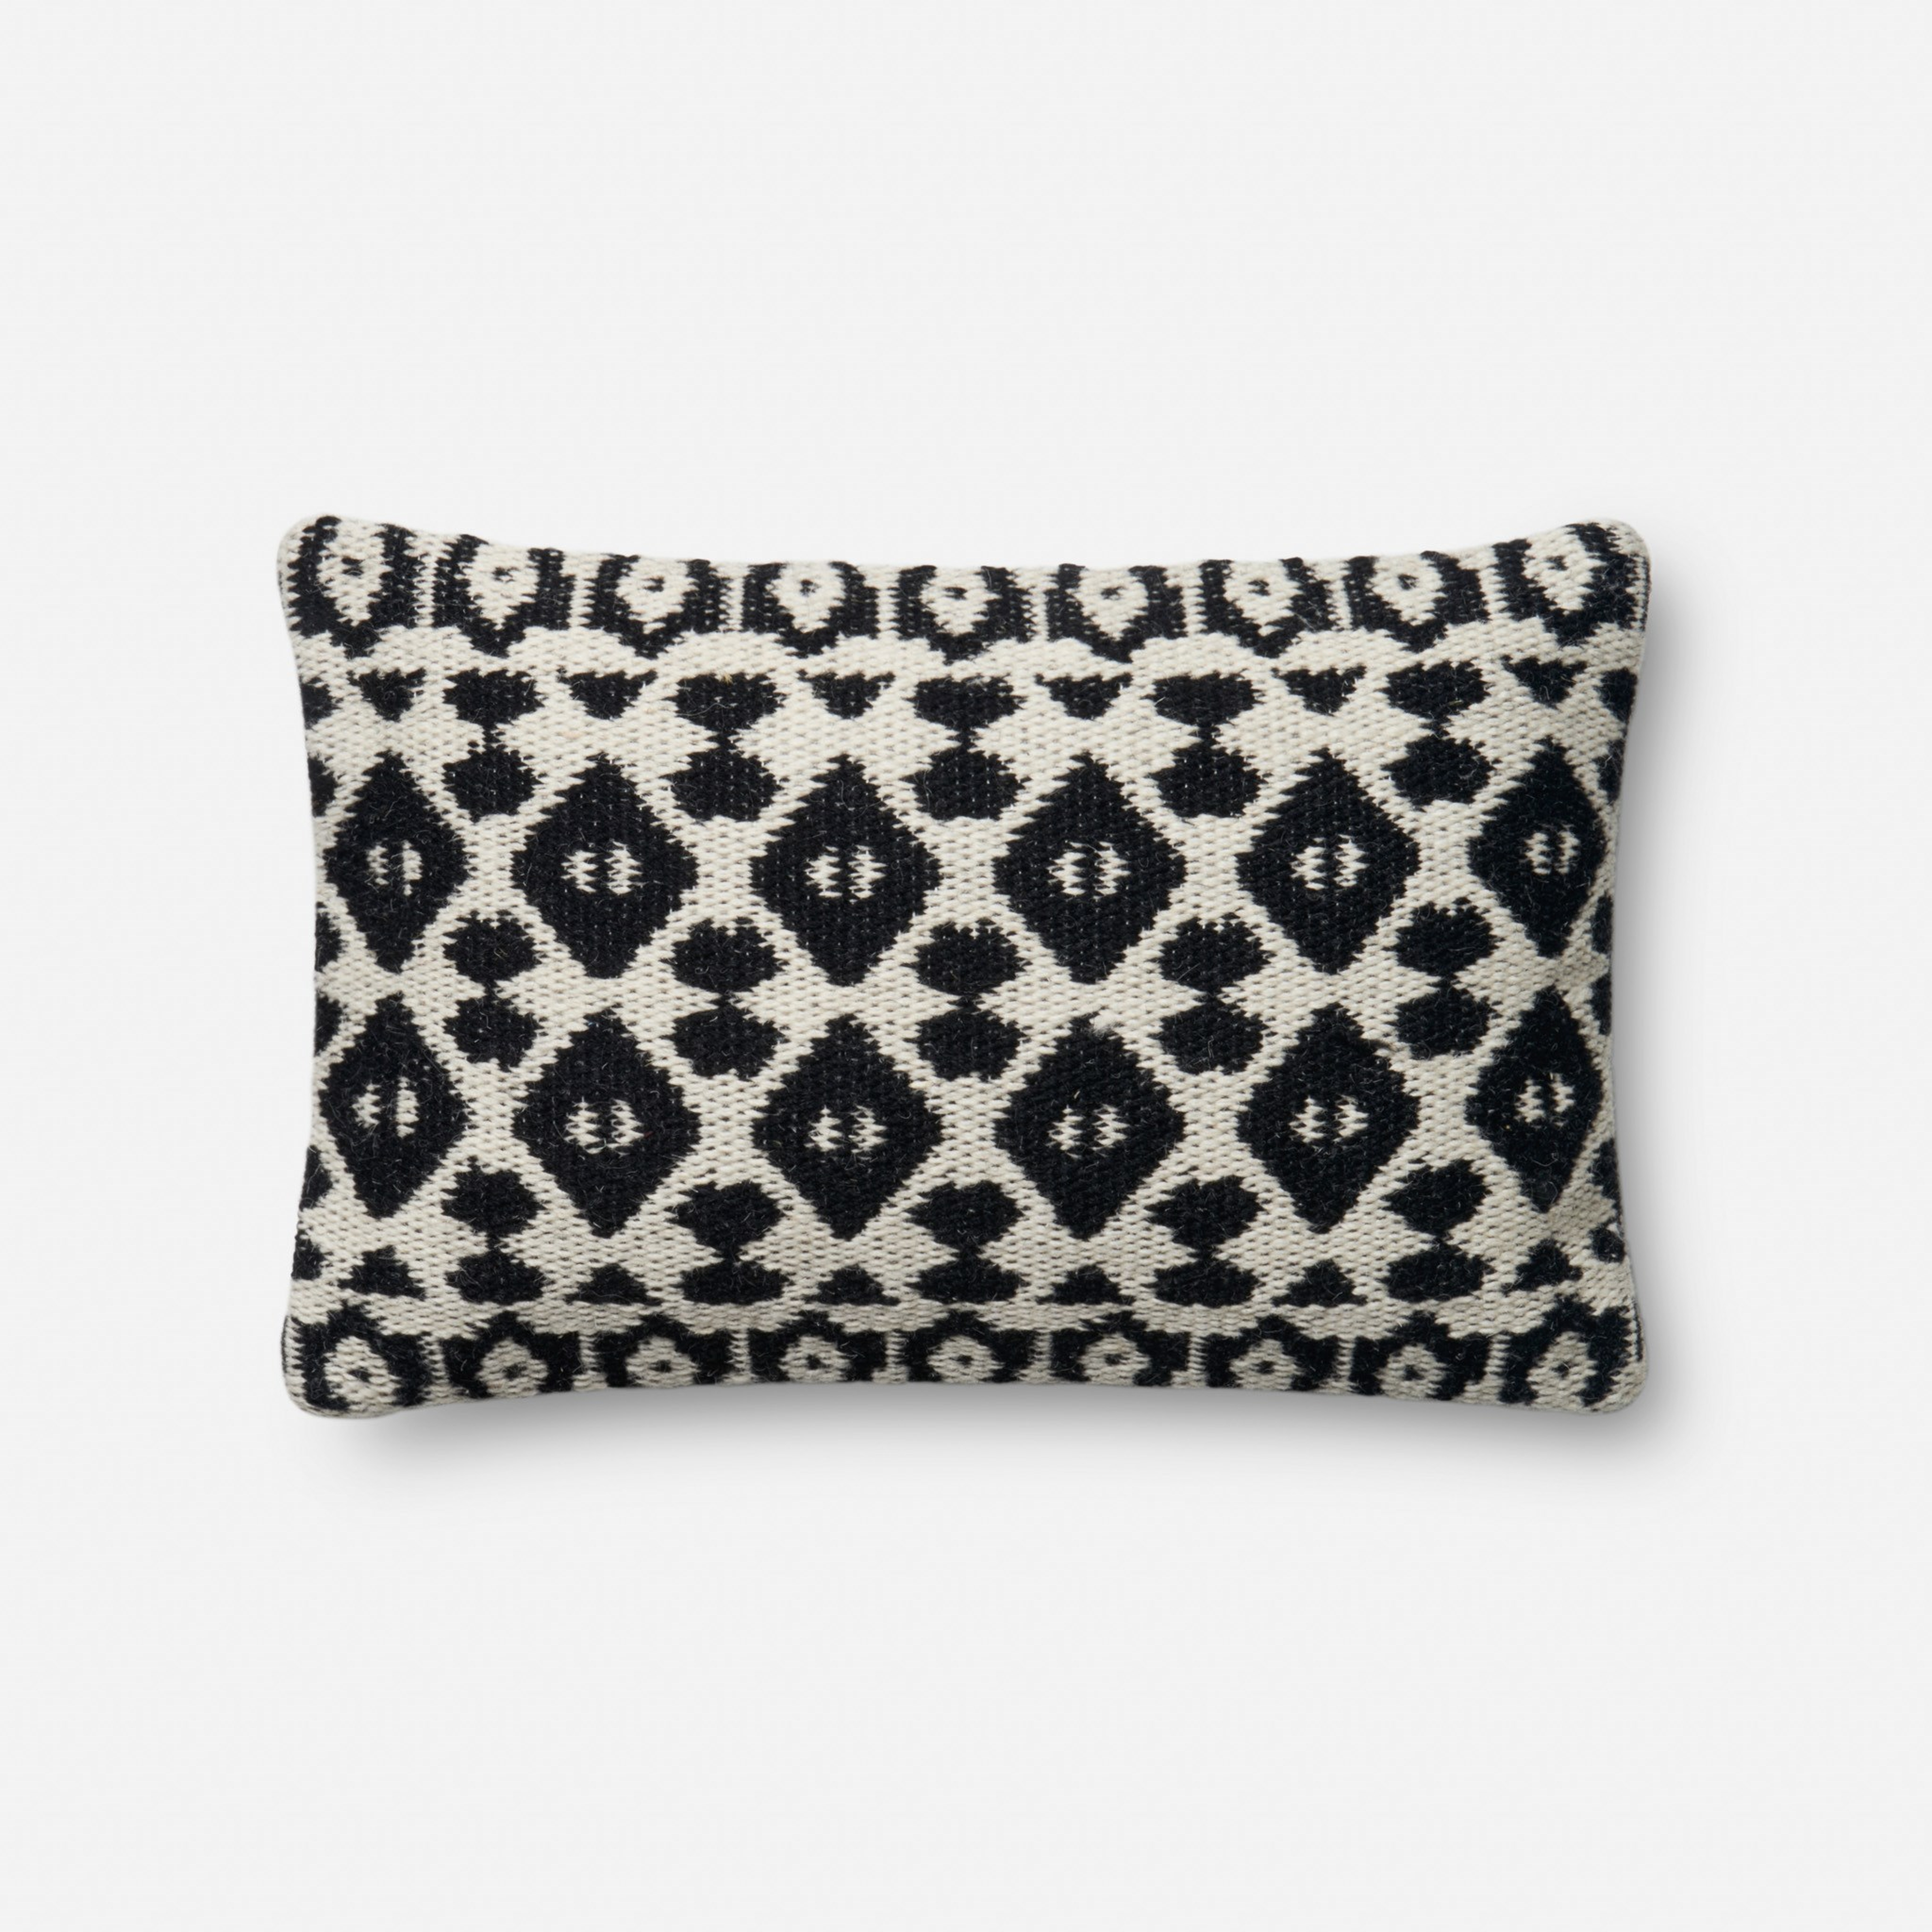 PILLOWS - BLACK / IVORY - Magnolia Home by Joana Gaines Crafted by Loloi Rugs